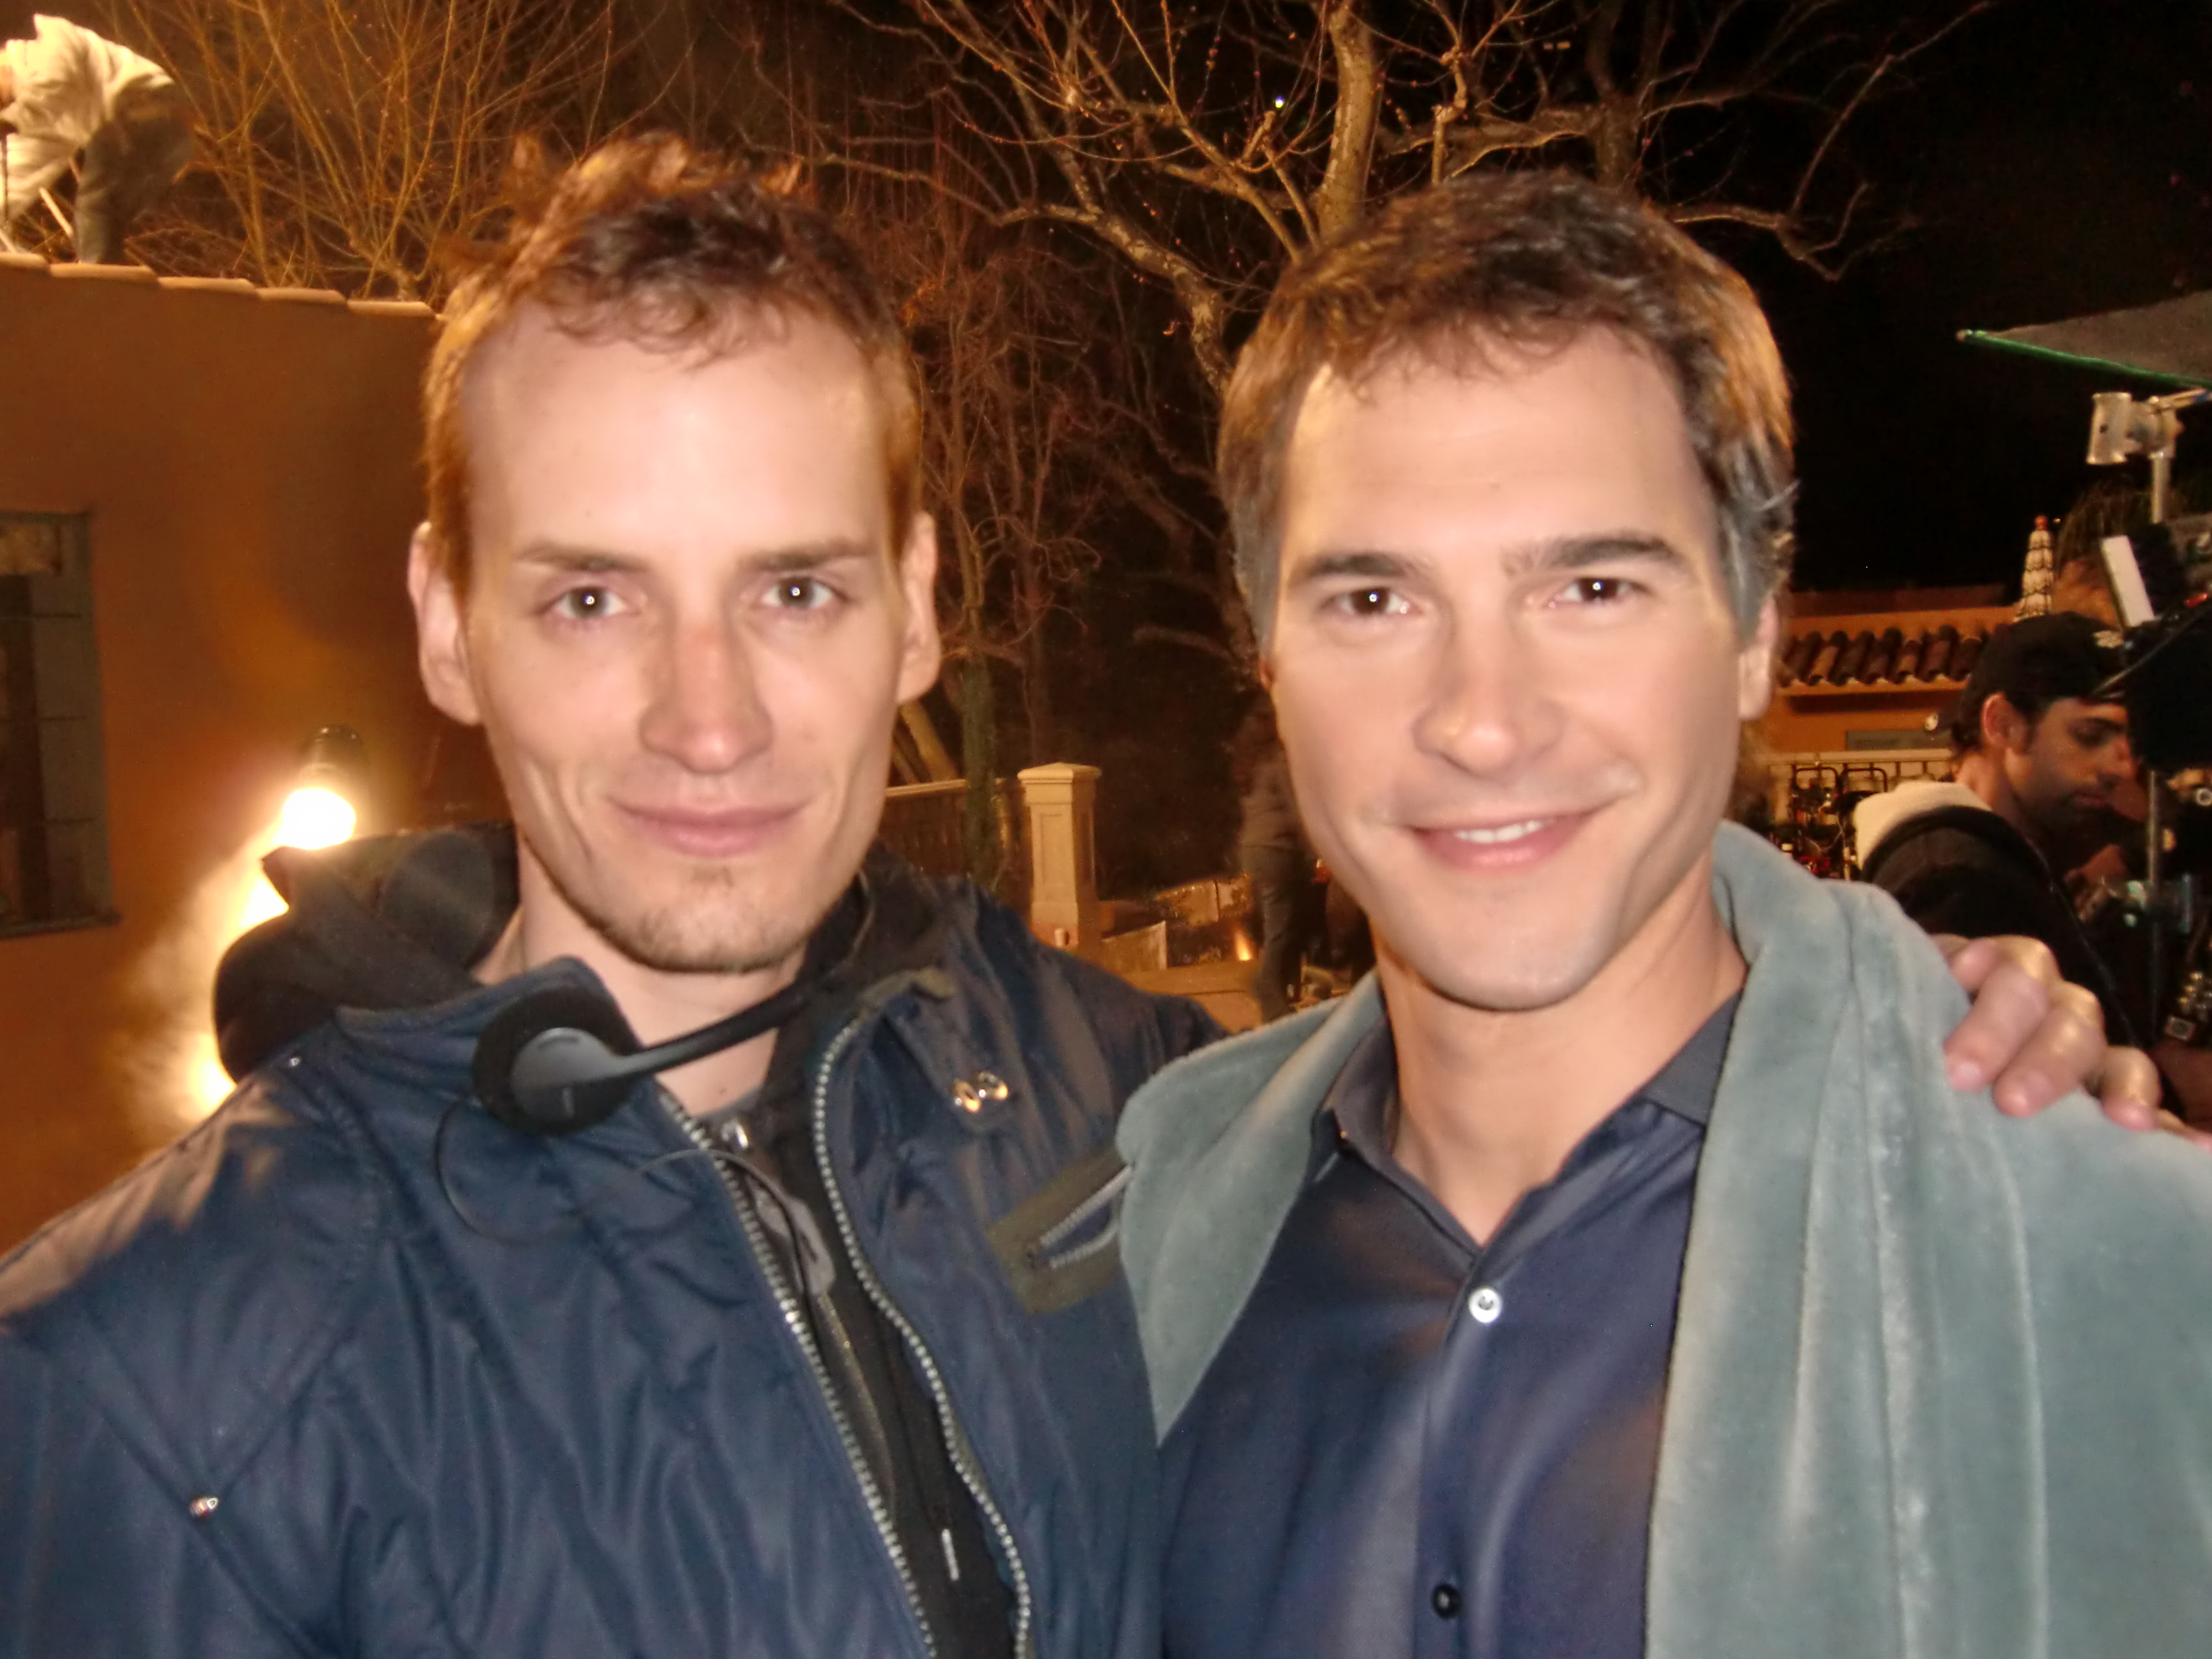 Director Casper Andreas with Michael Medico (John) on the set of 